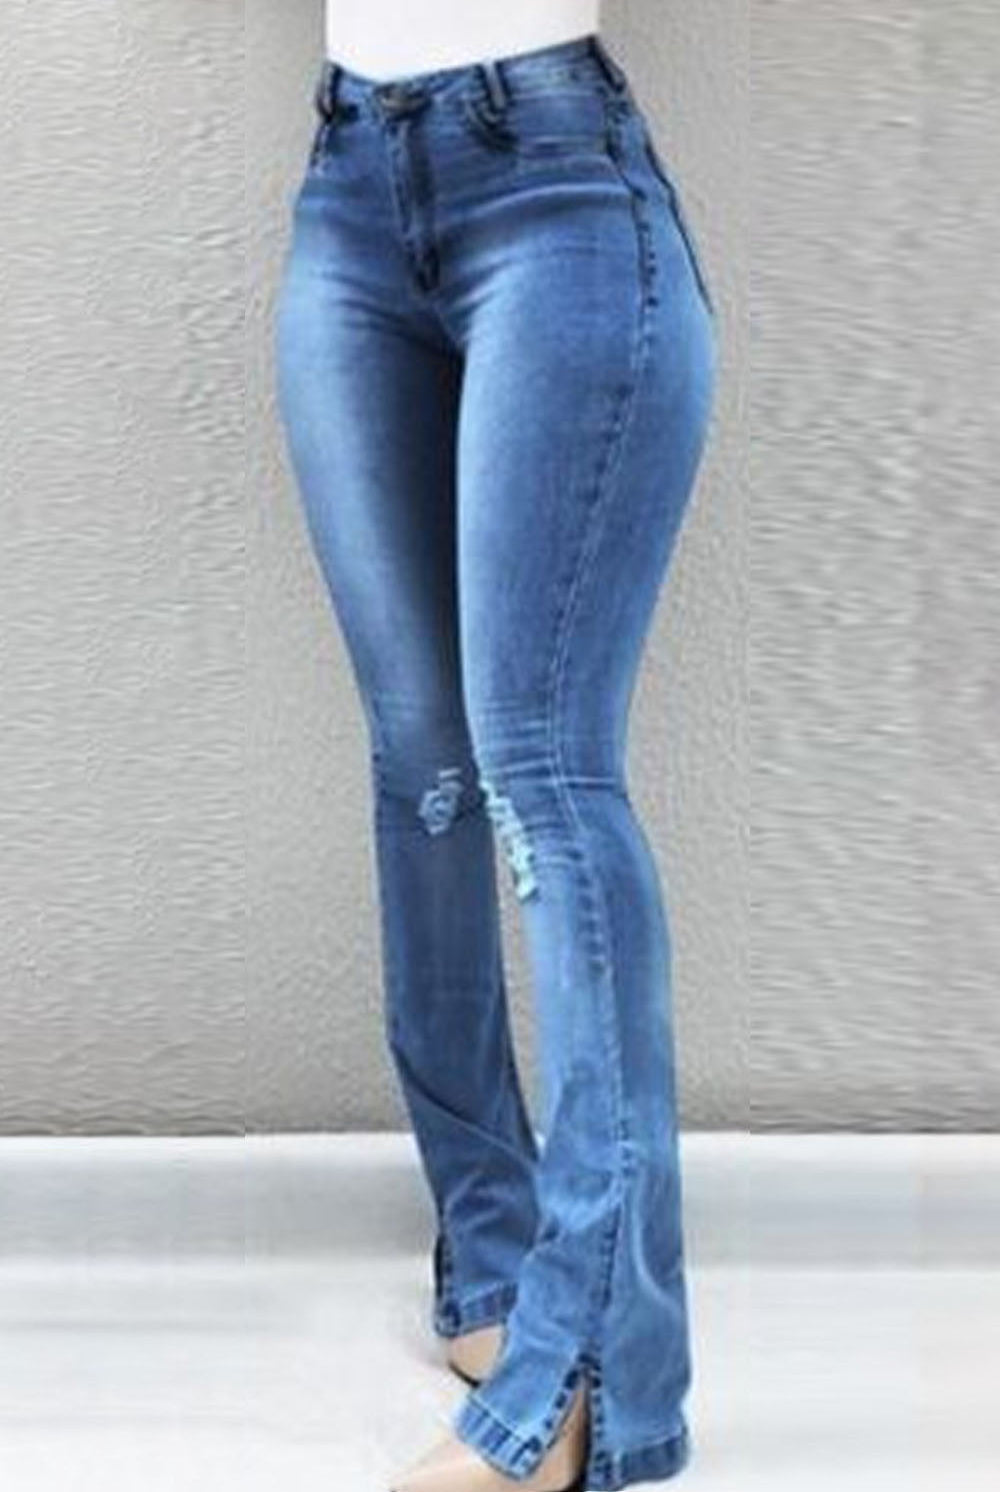 Buttoned Side Slit Bootcut Jeans - GemThreads Boutique Buttoned Side Slit Bootcut Jeans